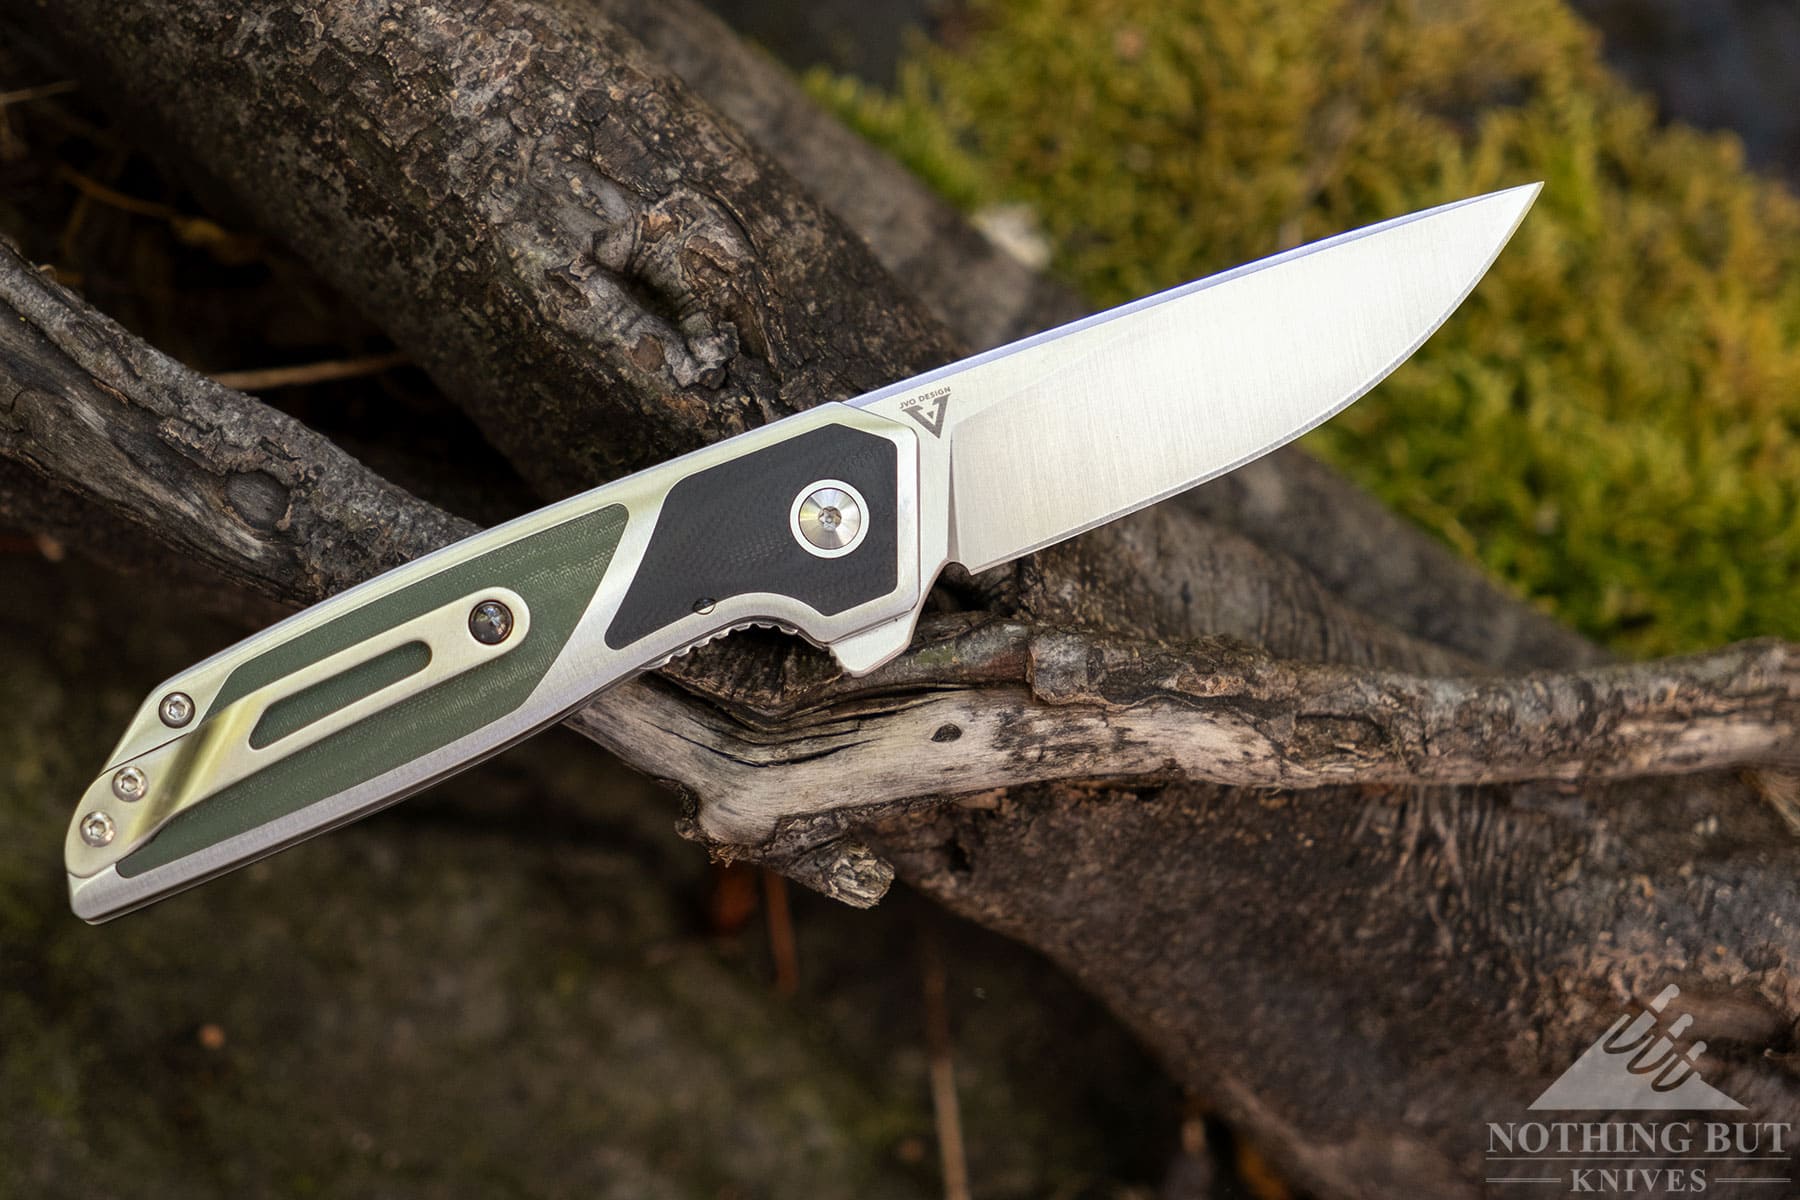 The Begg Knives Diamici pocket knife in the fully open position on a large root.